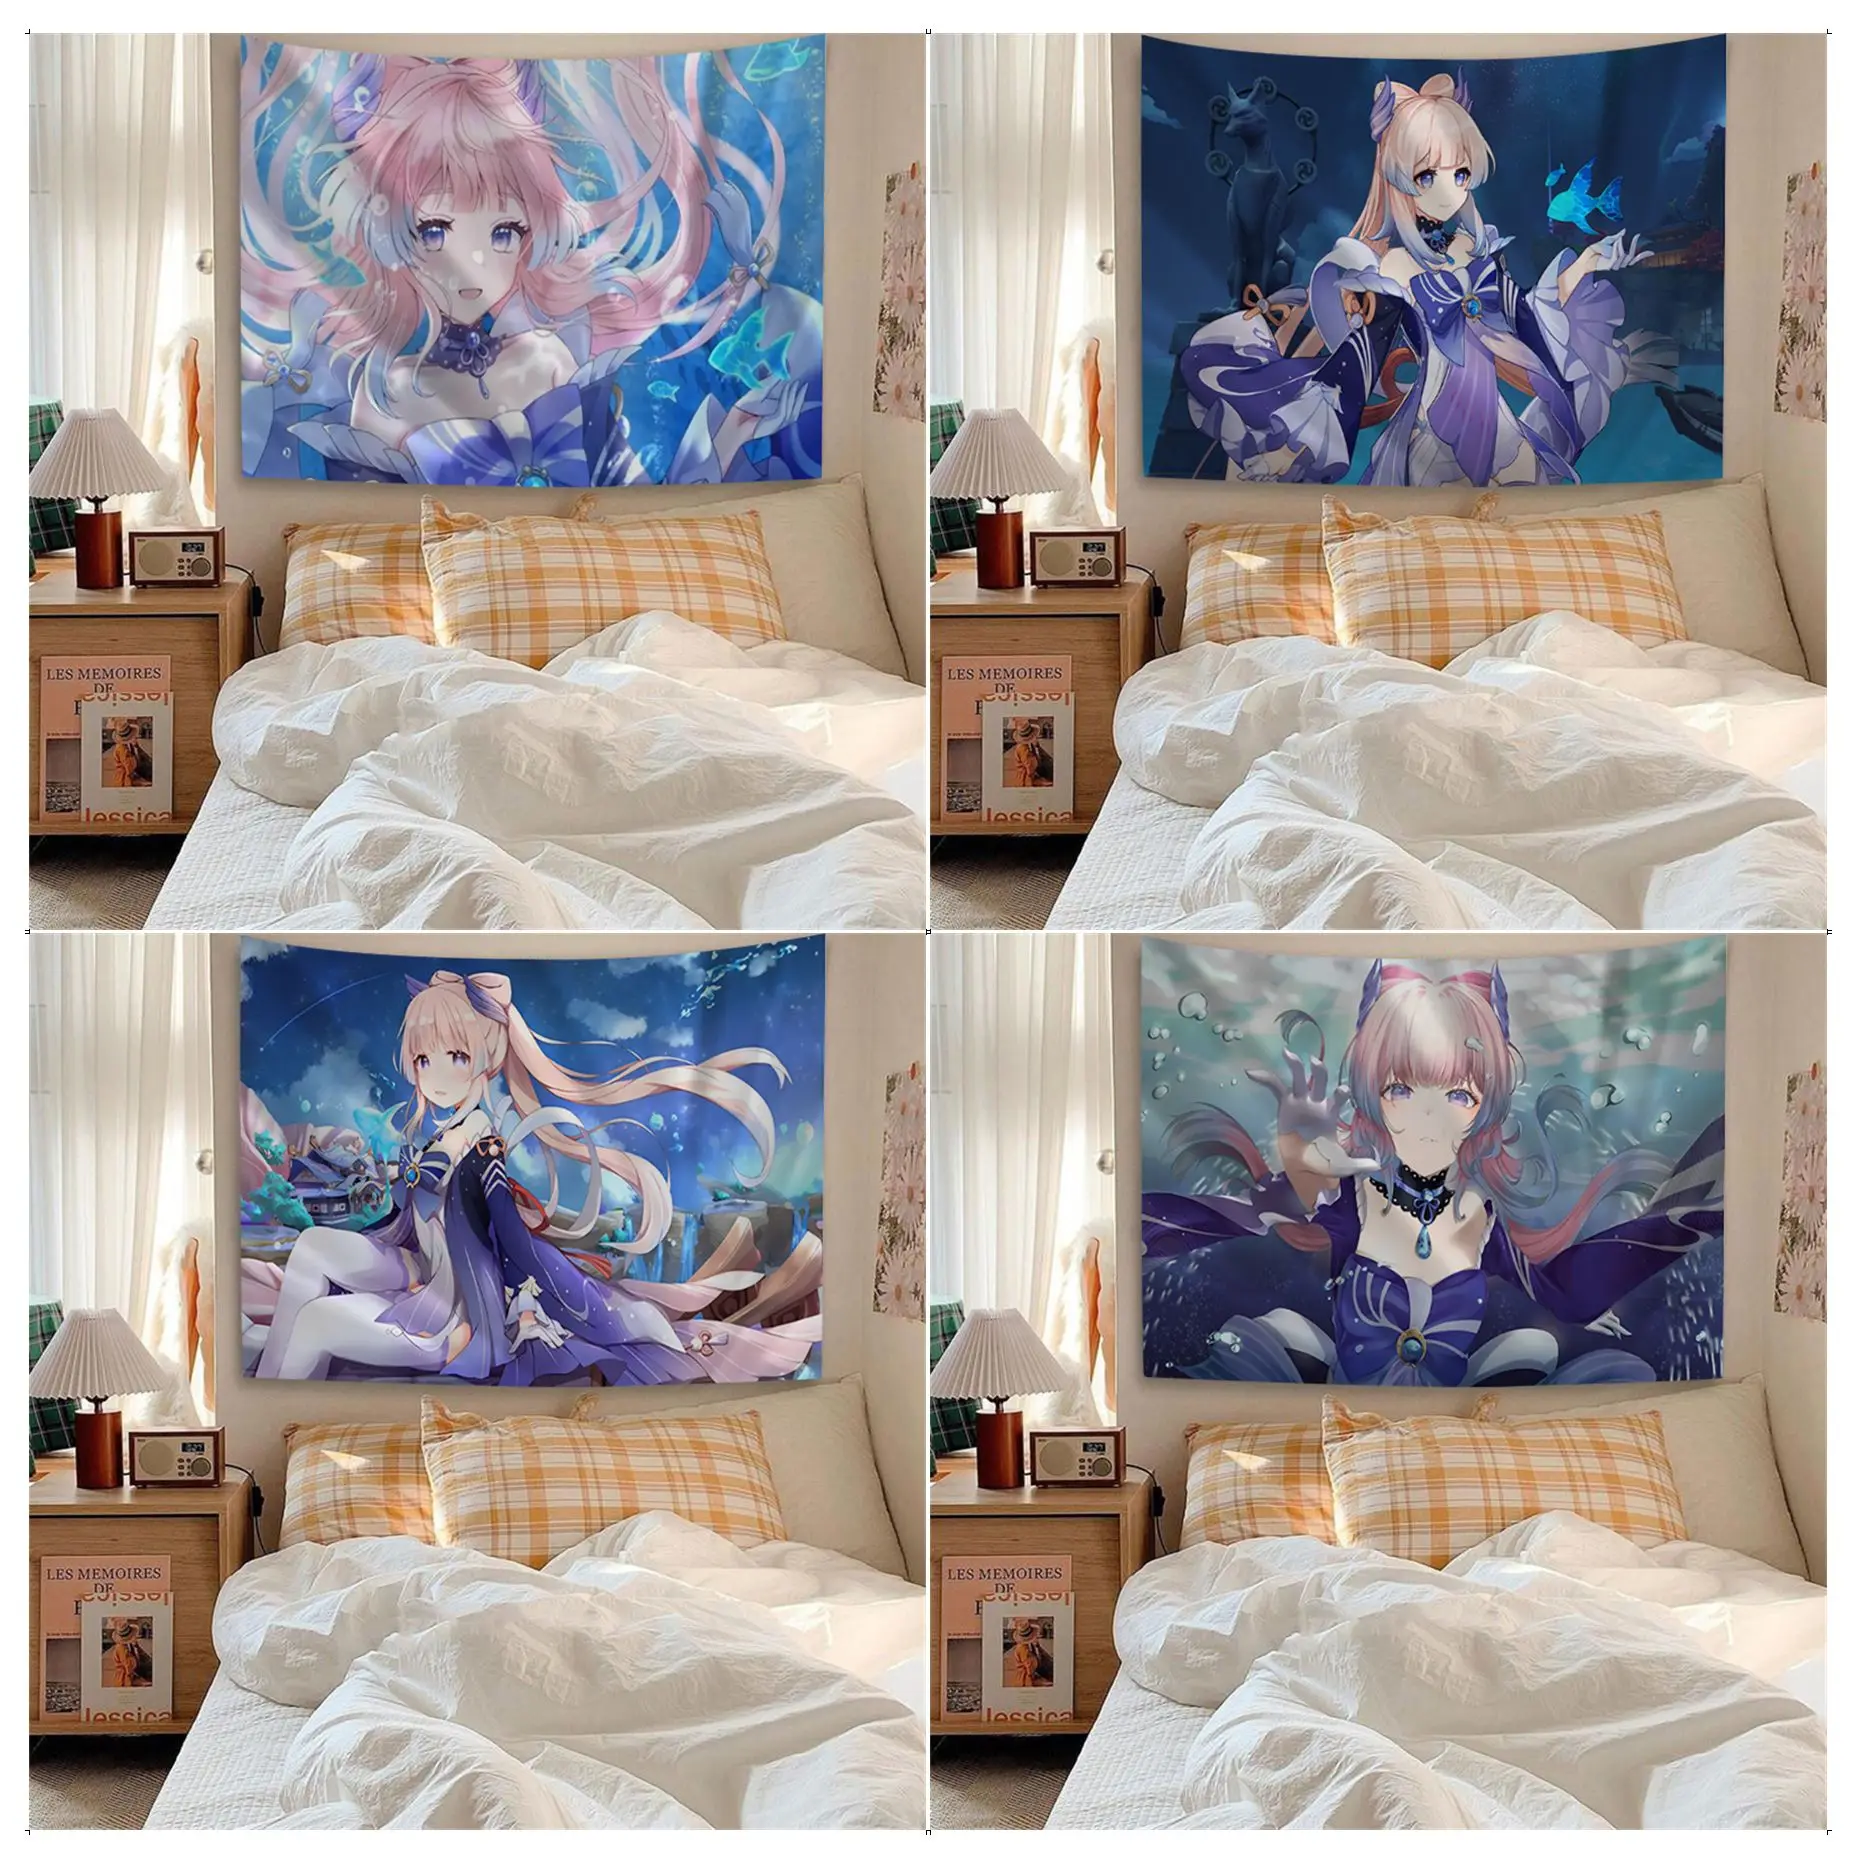 

Anime Genshin Impact Hippie Wall Hanging Tapestries Hanging Tarot Hippie Wall Rugs Dorm Japanese Tapestry